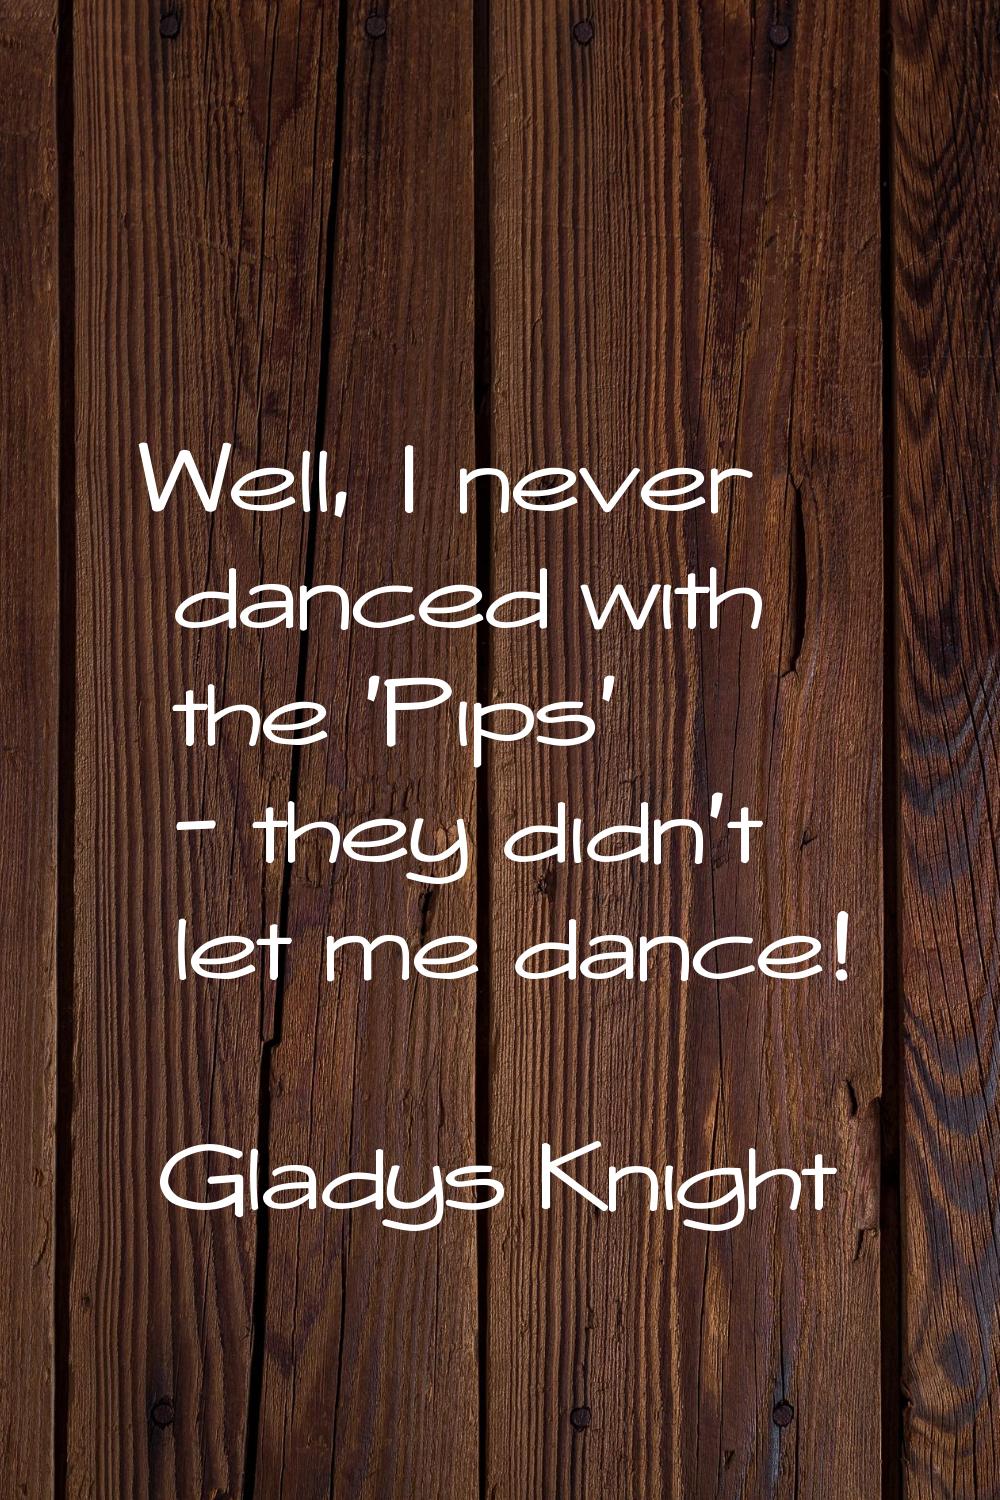 Well, I never danced with the 'Pips' - they didn't let me dance!